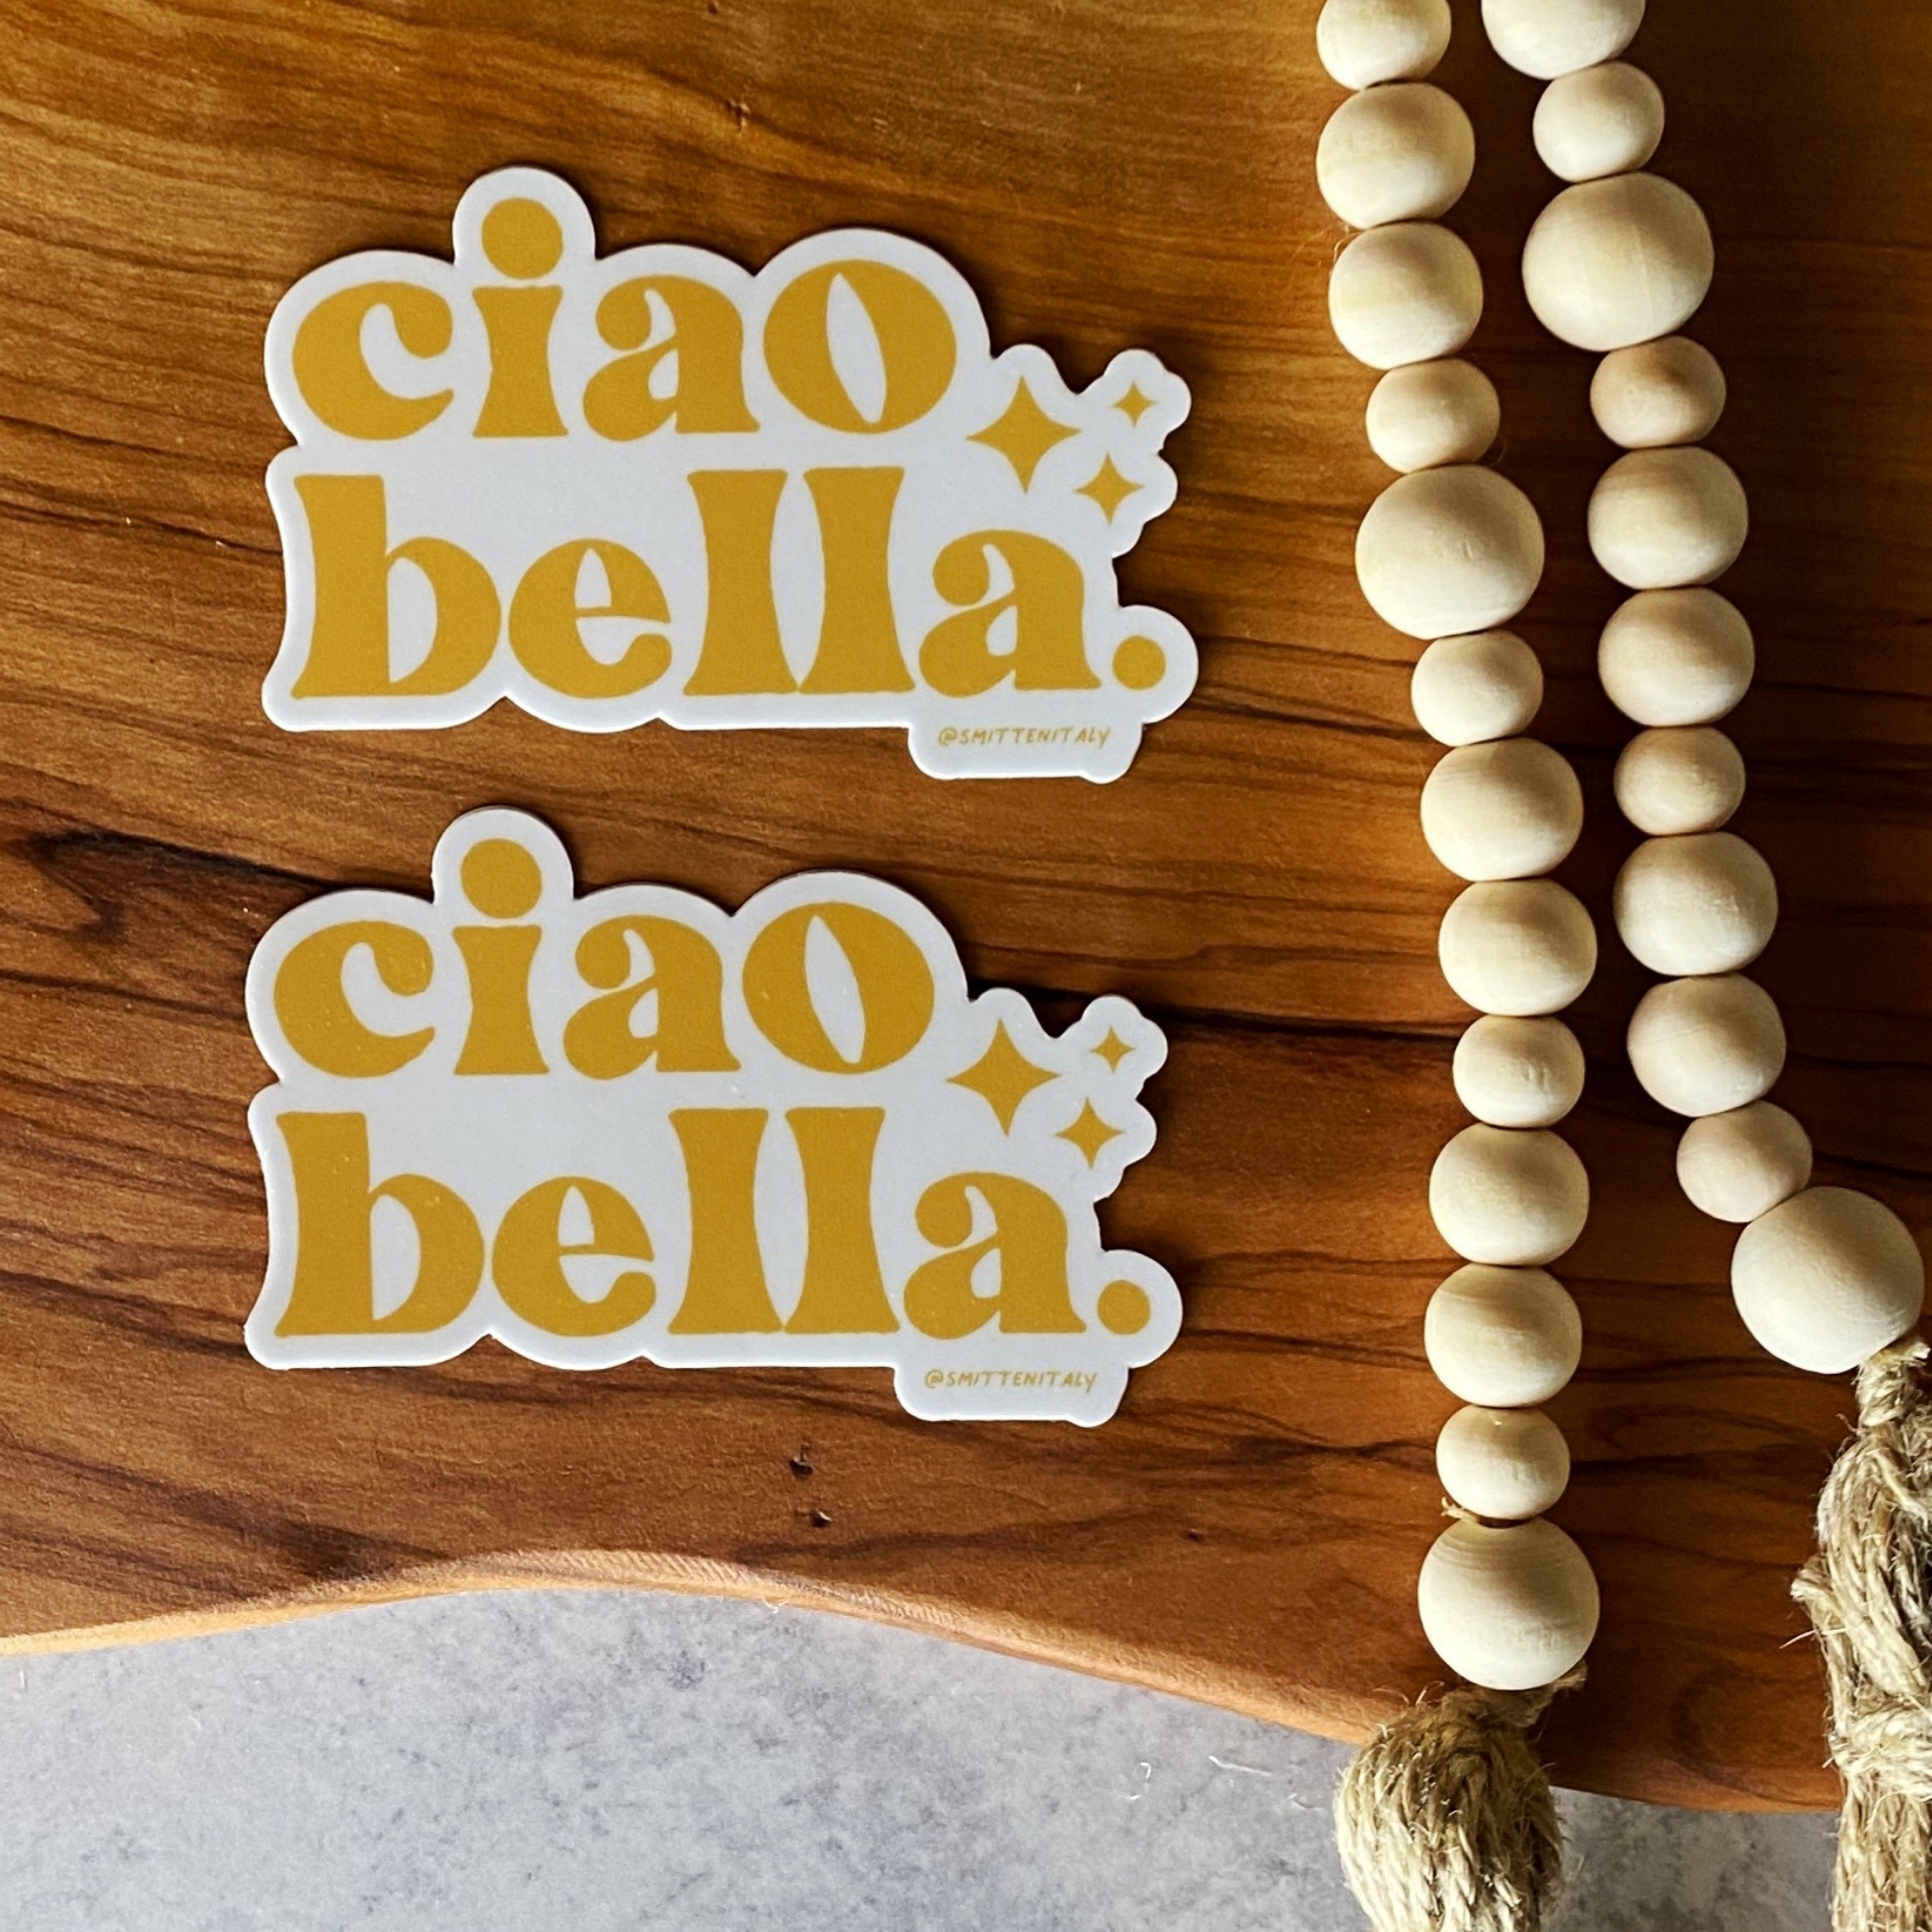 Stickers for Italy lovers are here! 4